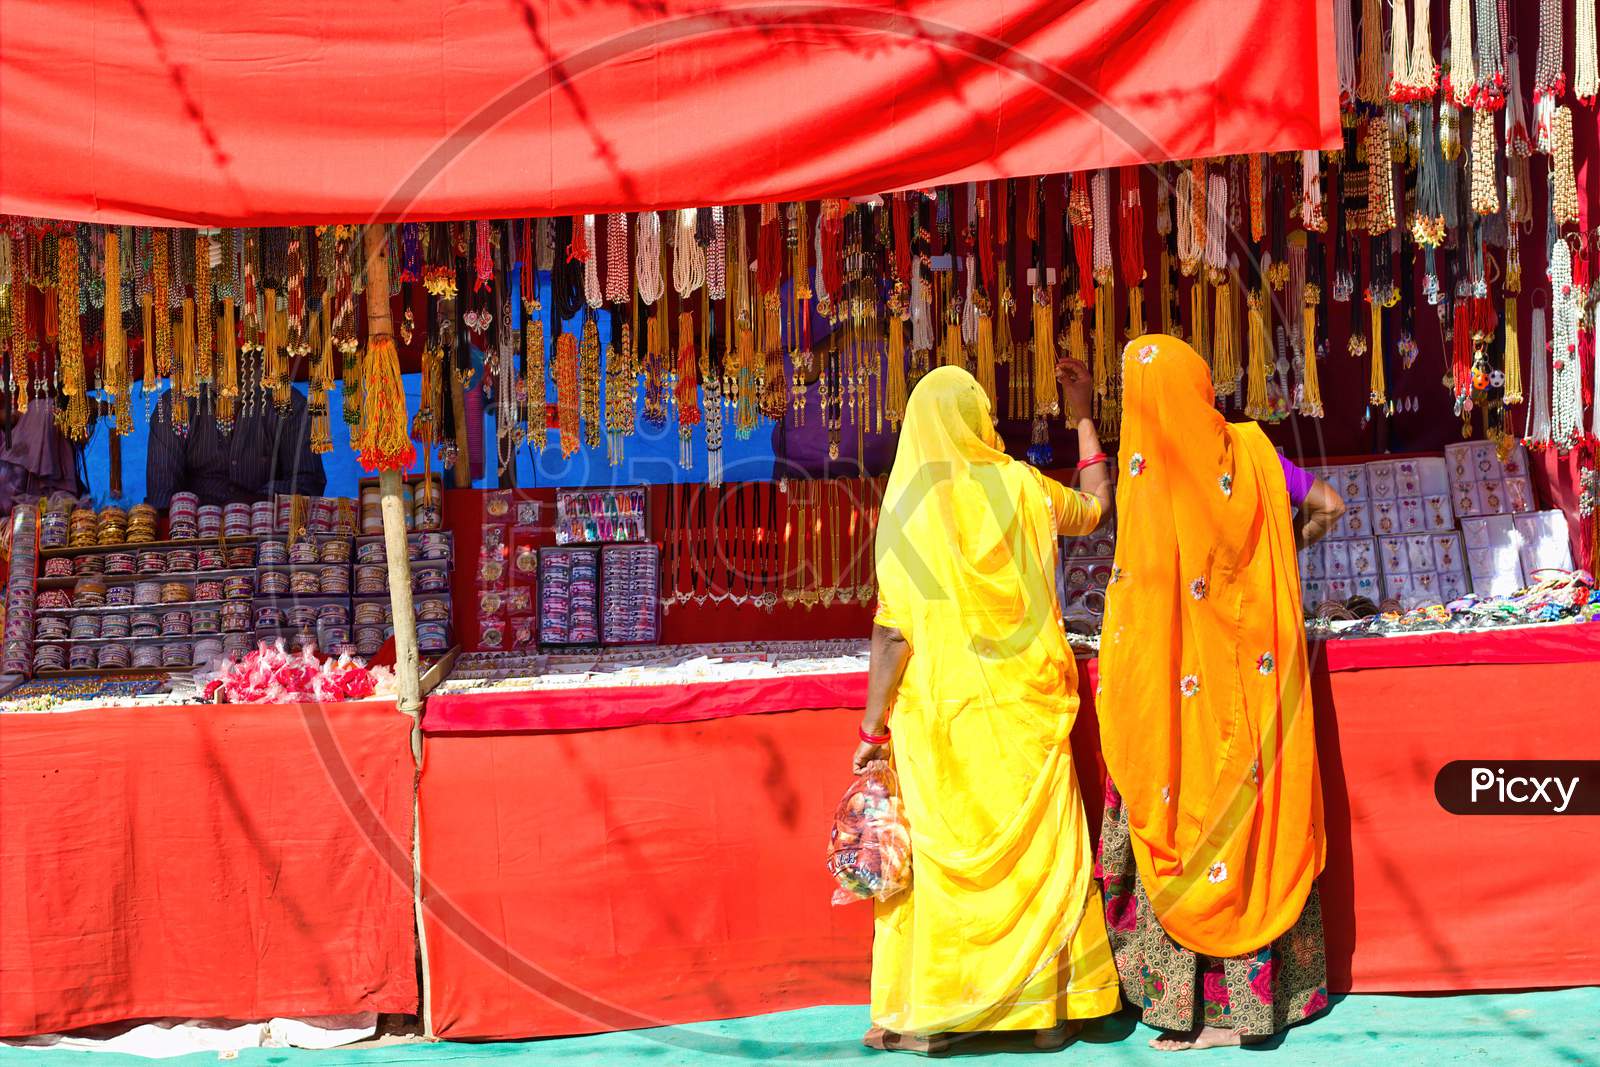 Couple Of Unidentified Women In Traditional Hindu Wear Saree Buying Or Shopping Jewelery Items In The Commercial Street Of Pushkar Fair In State Of Rajasthan, India. Colorful Indian Culture Concept